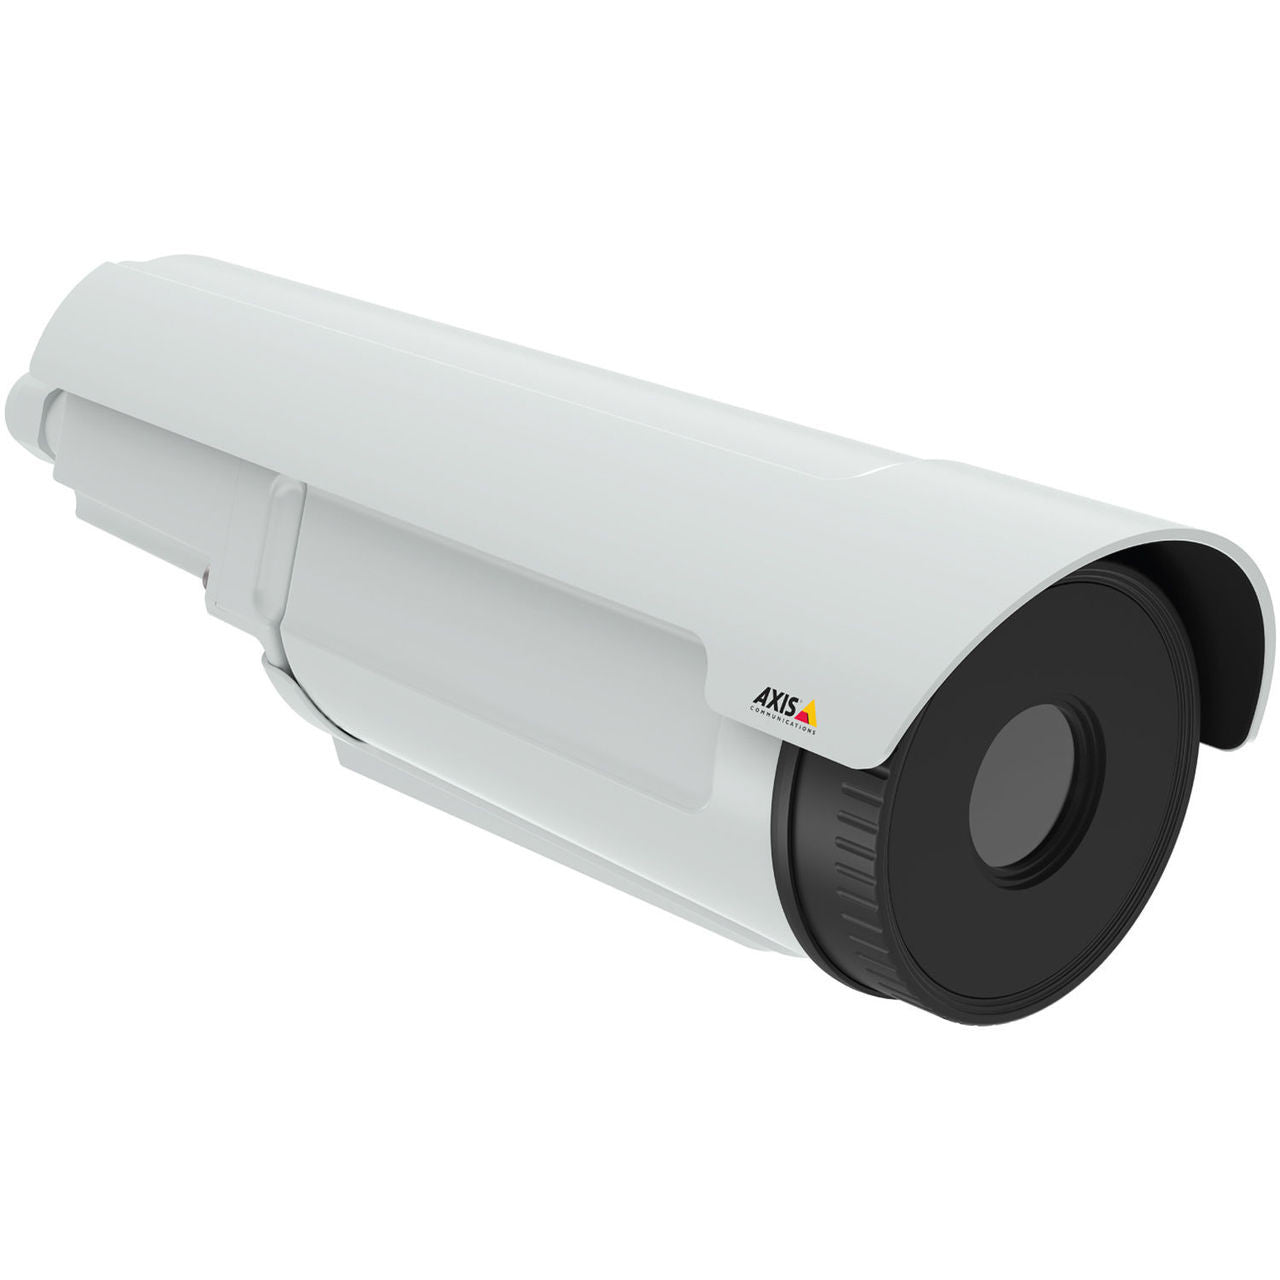 AXIS Q1941-E PT Mount (0975-001) 35mm 30fps Thermal Network Camera